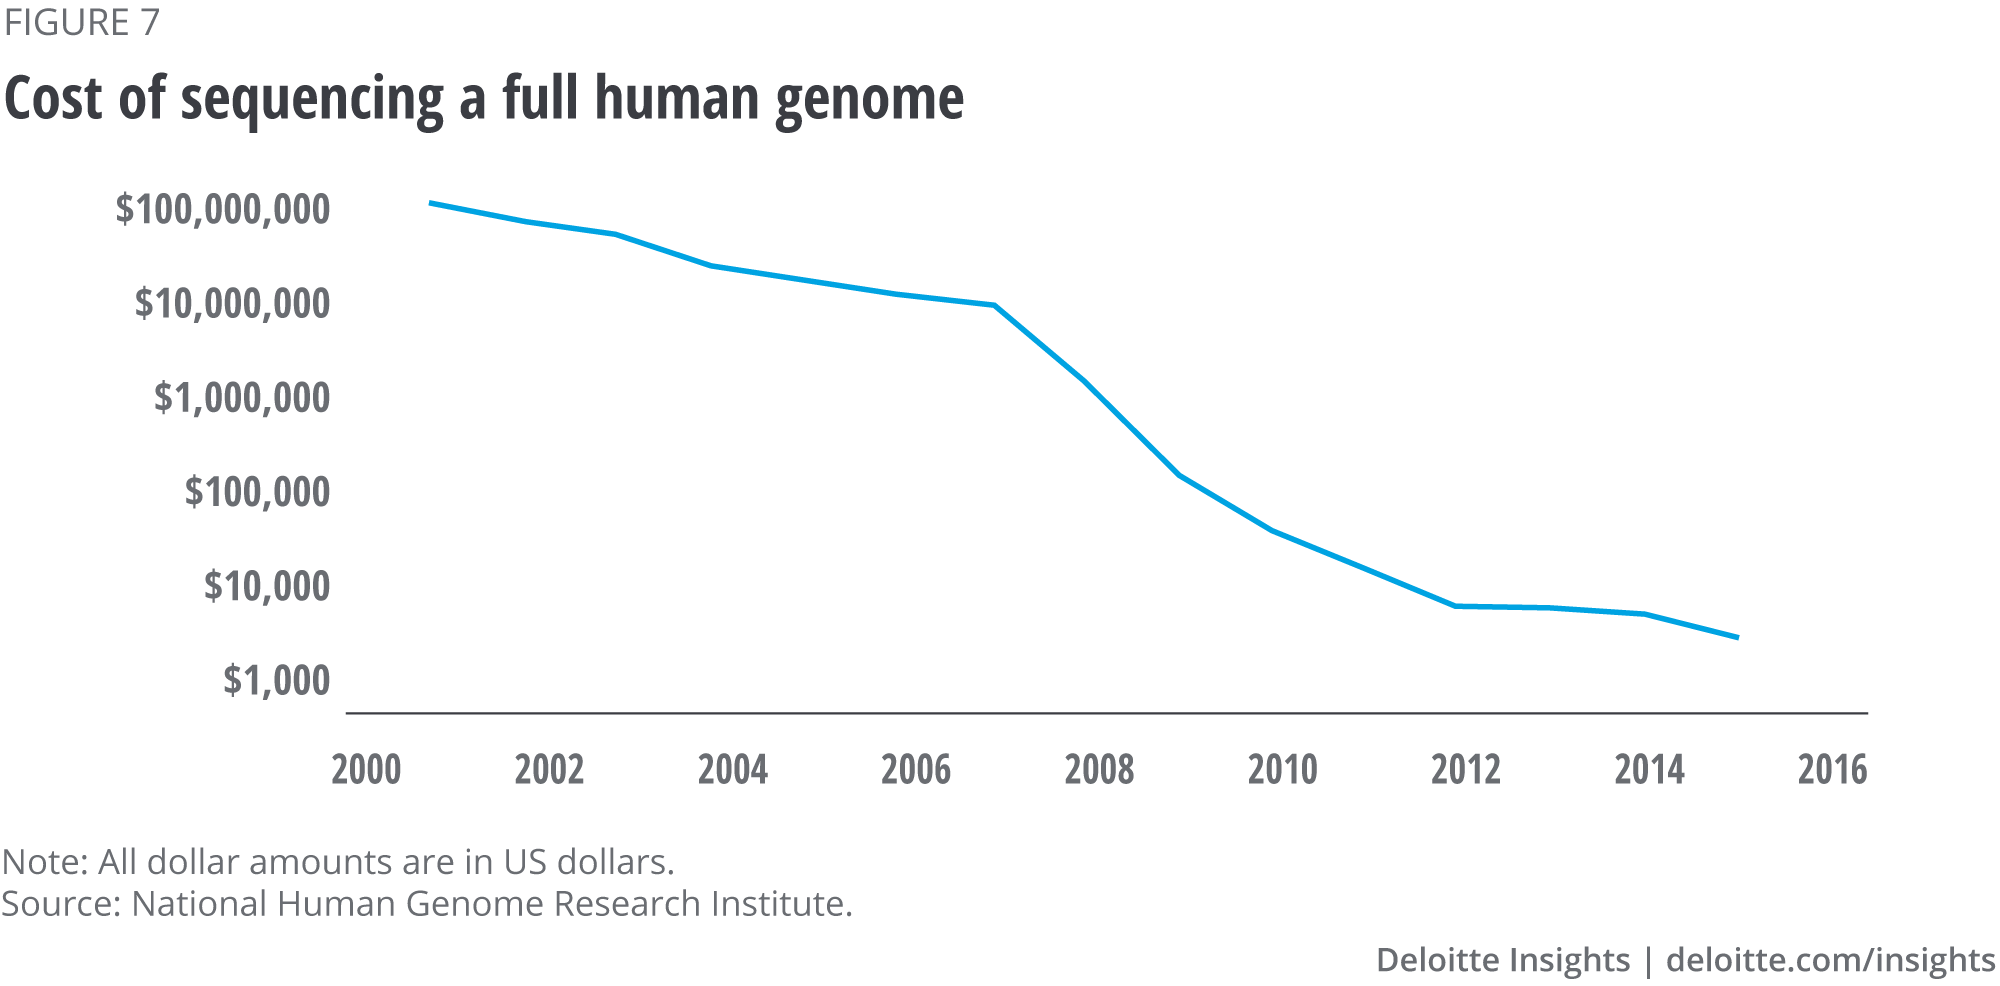 Cost of sequencing a full human genome